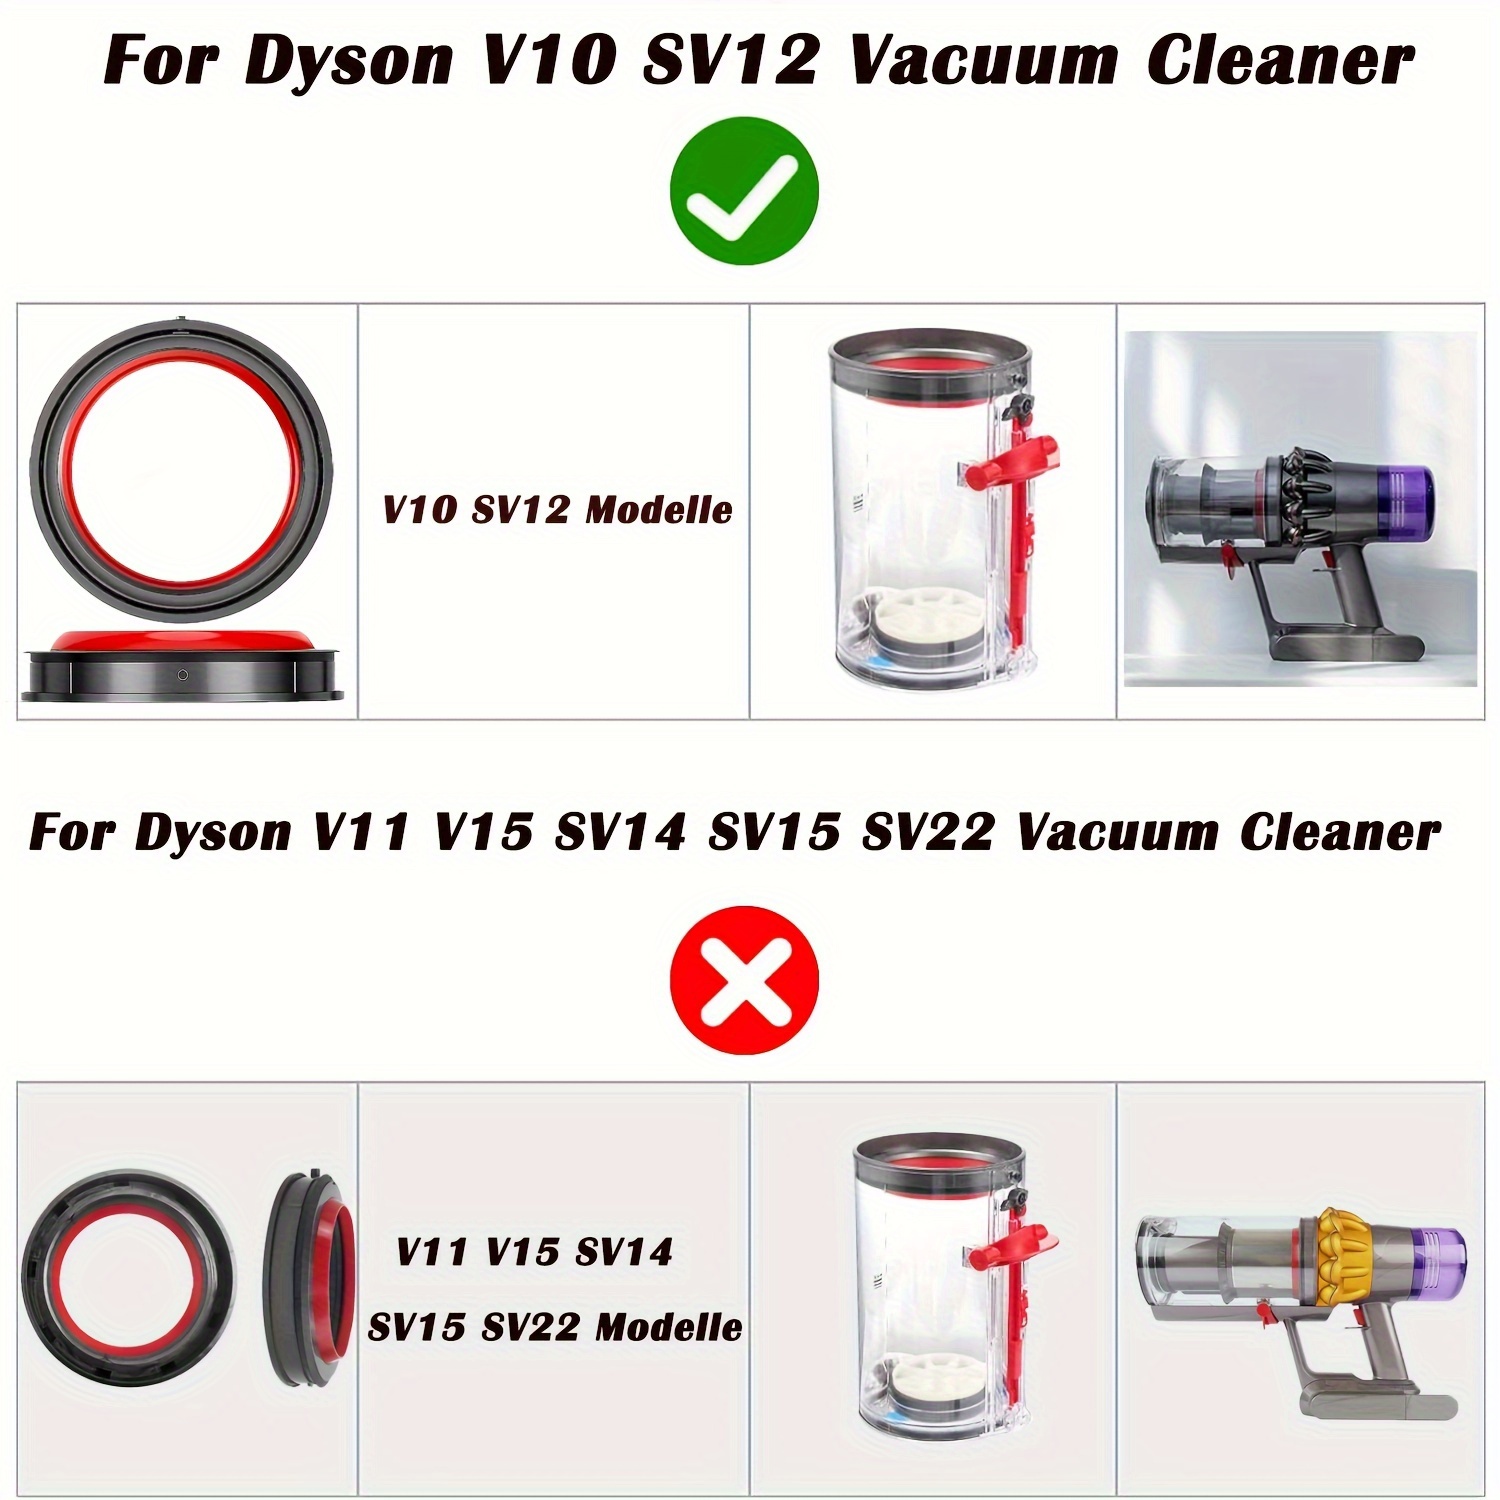  Dust Bin Top Fixed Sealing Ring Replacement for Dyson V10 SV12  Vacuum Cleaner Accessories